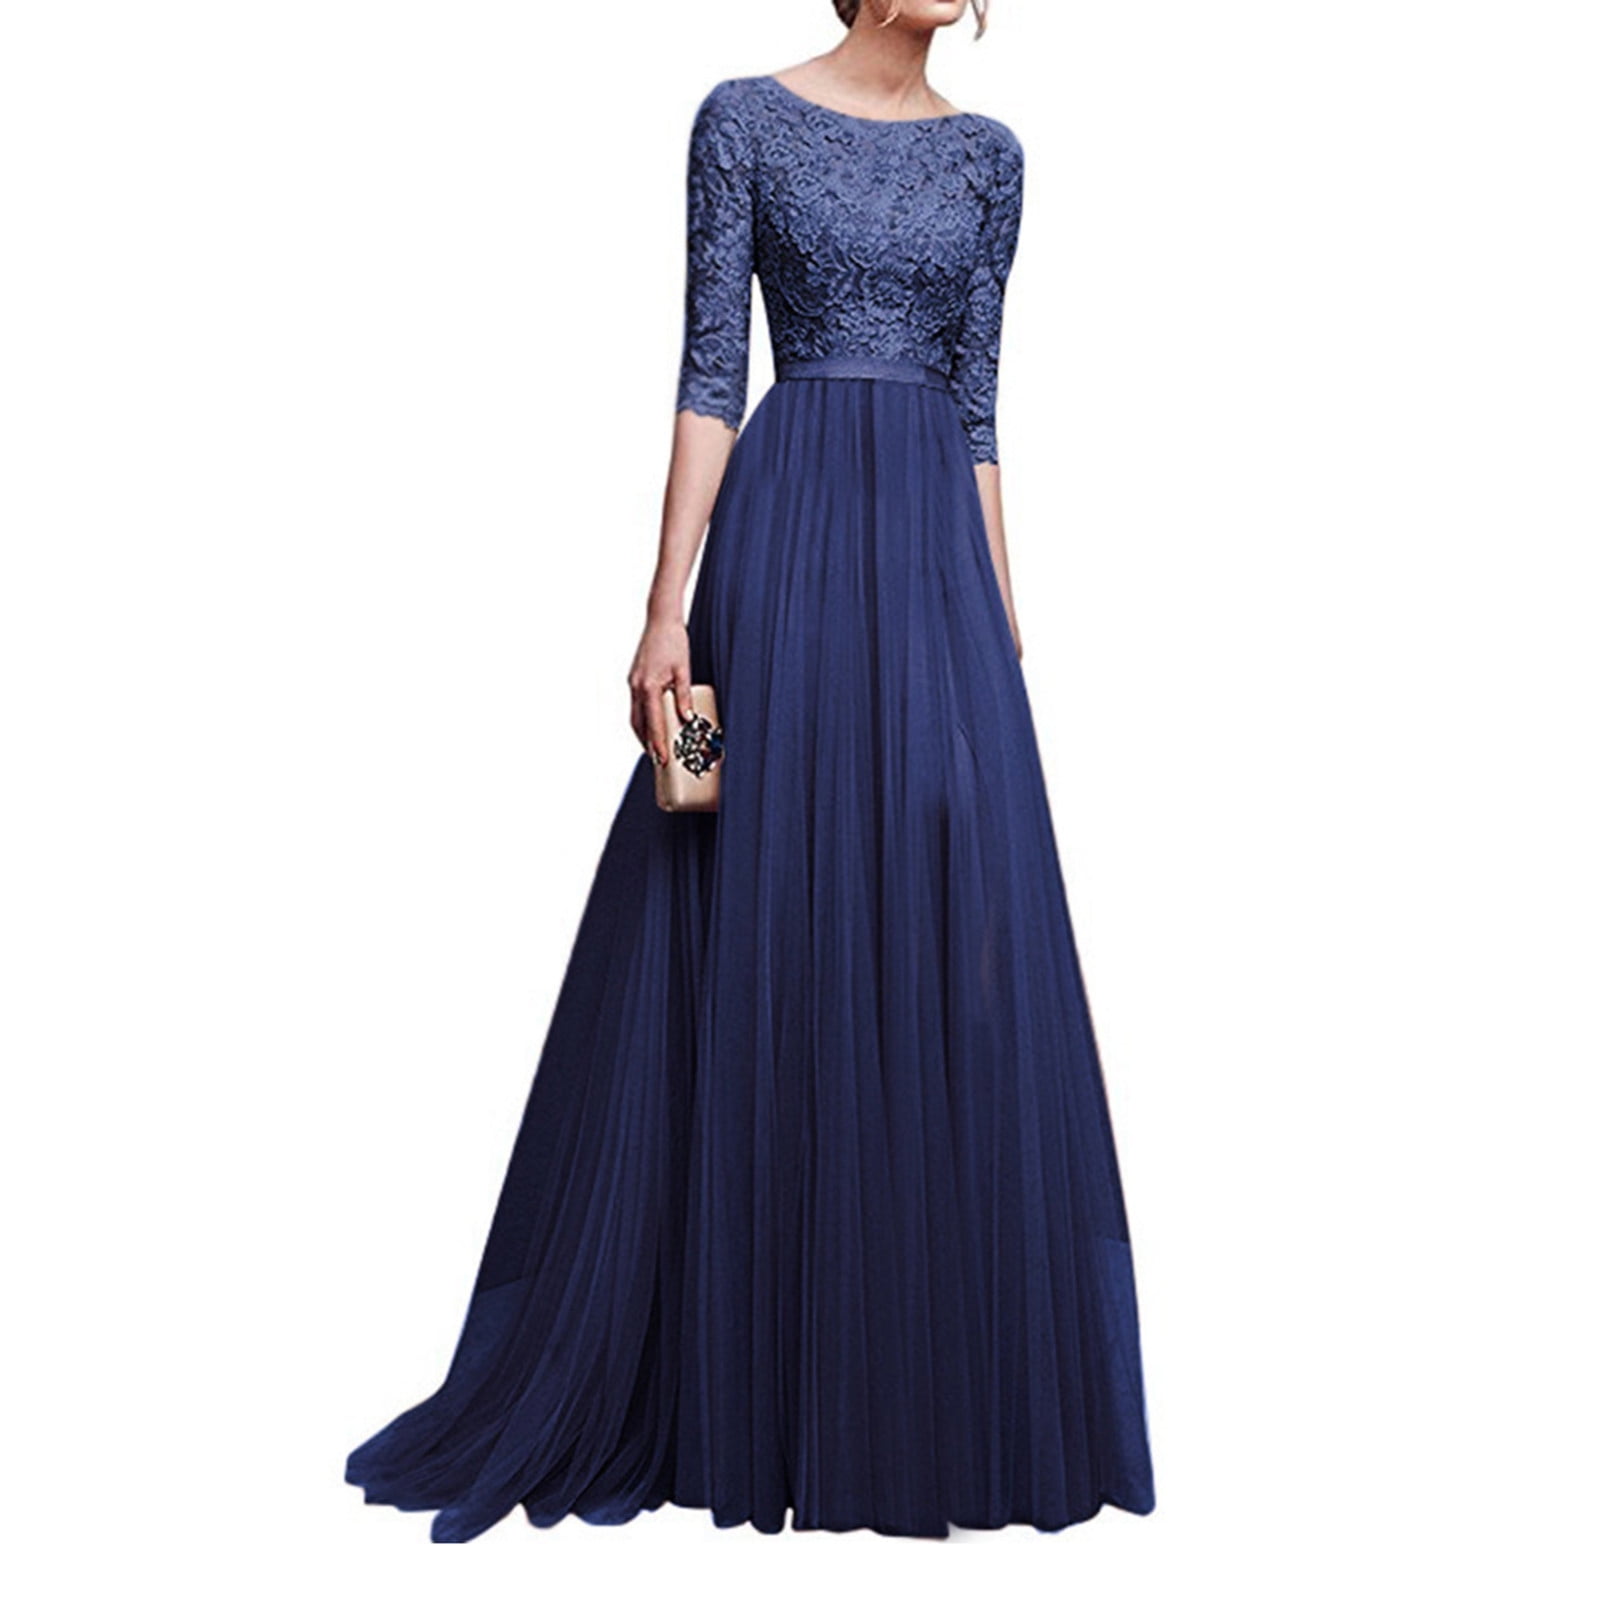 Mgoohoen Formal Prom Dresses for Women Lace Hollow Out Round Neck Half ...